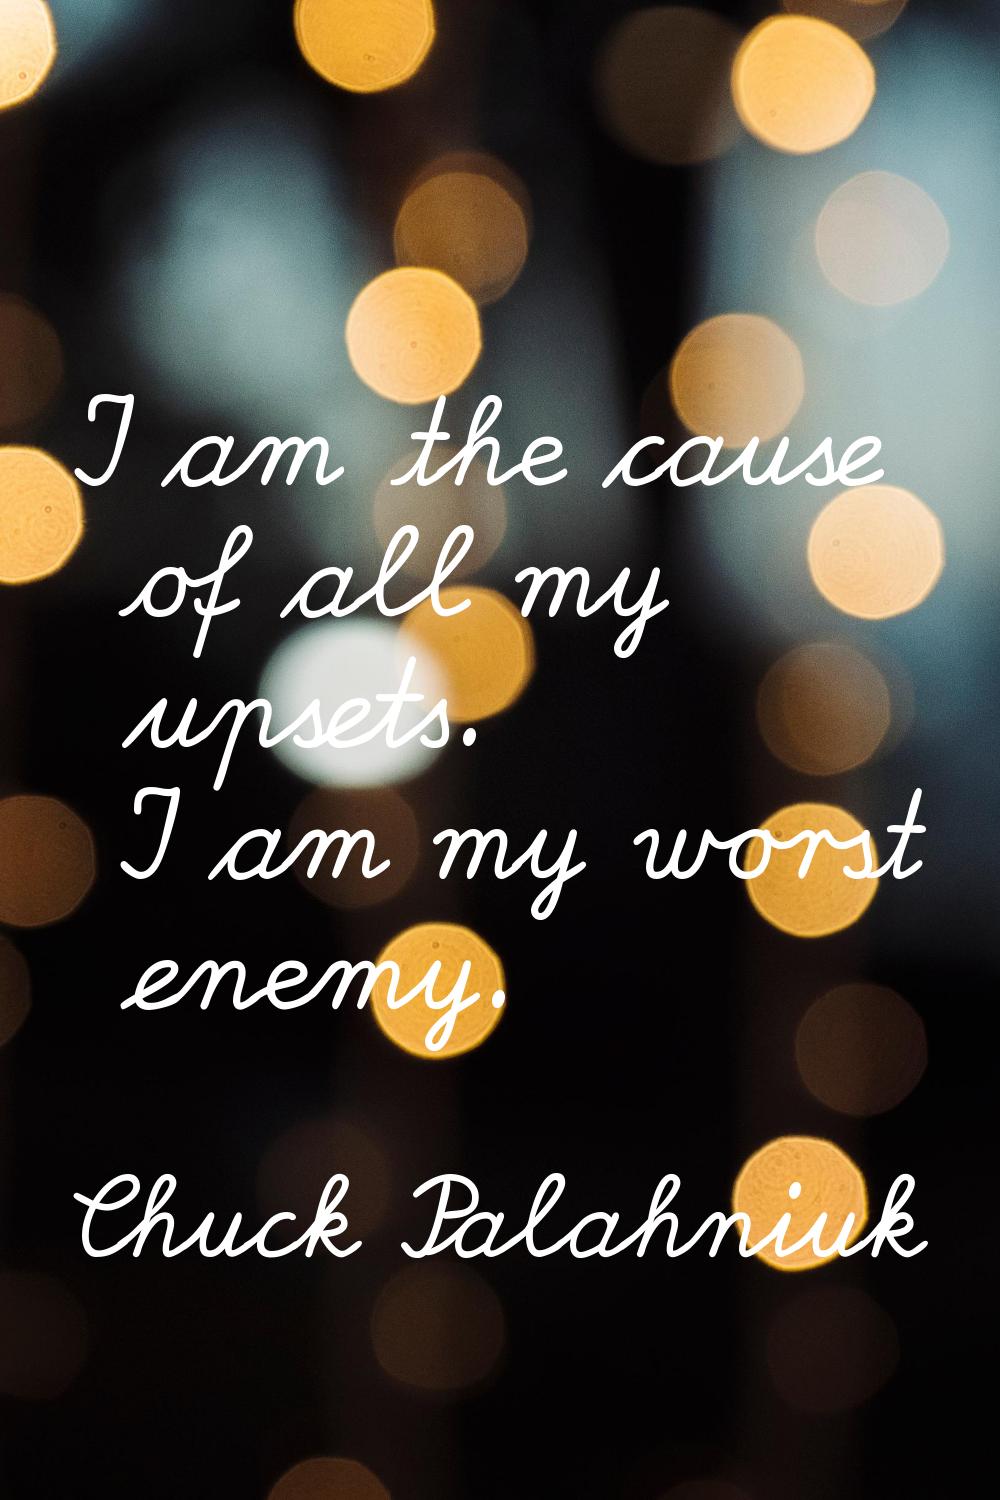 I am the cause of all my upsets. I am my worst enemy.